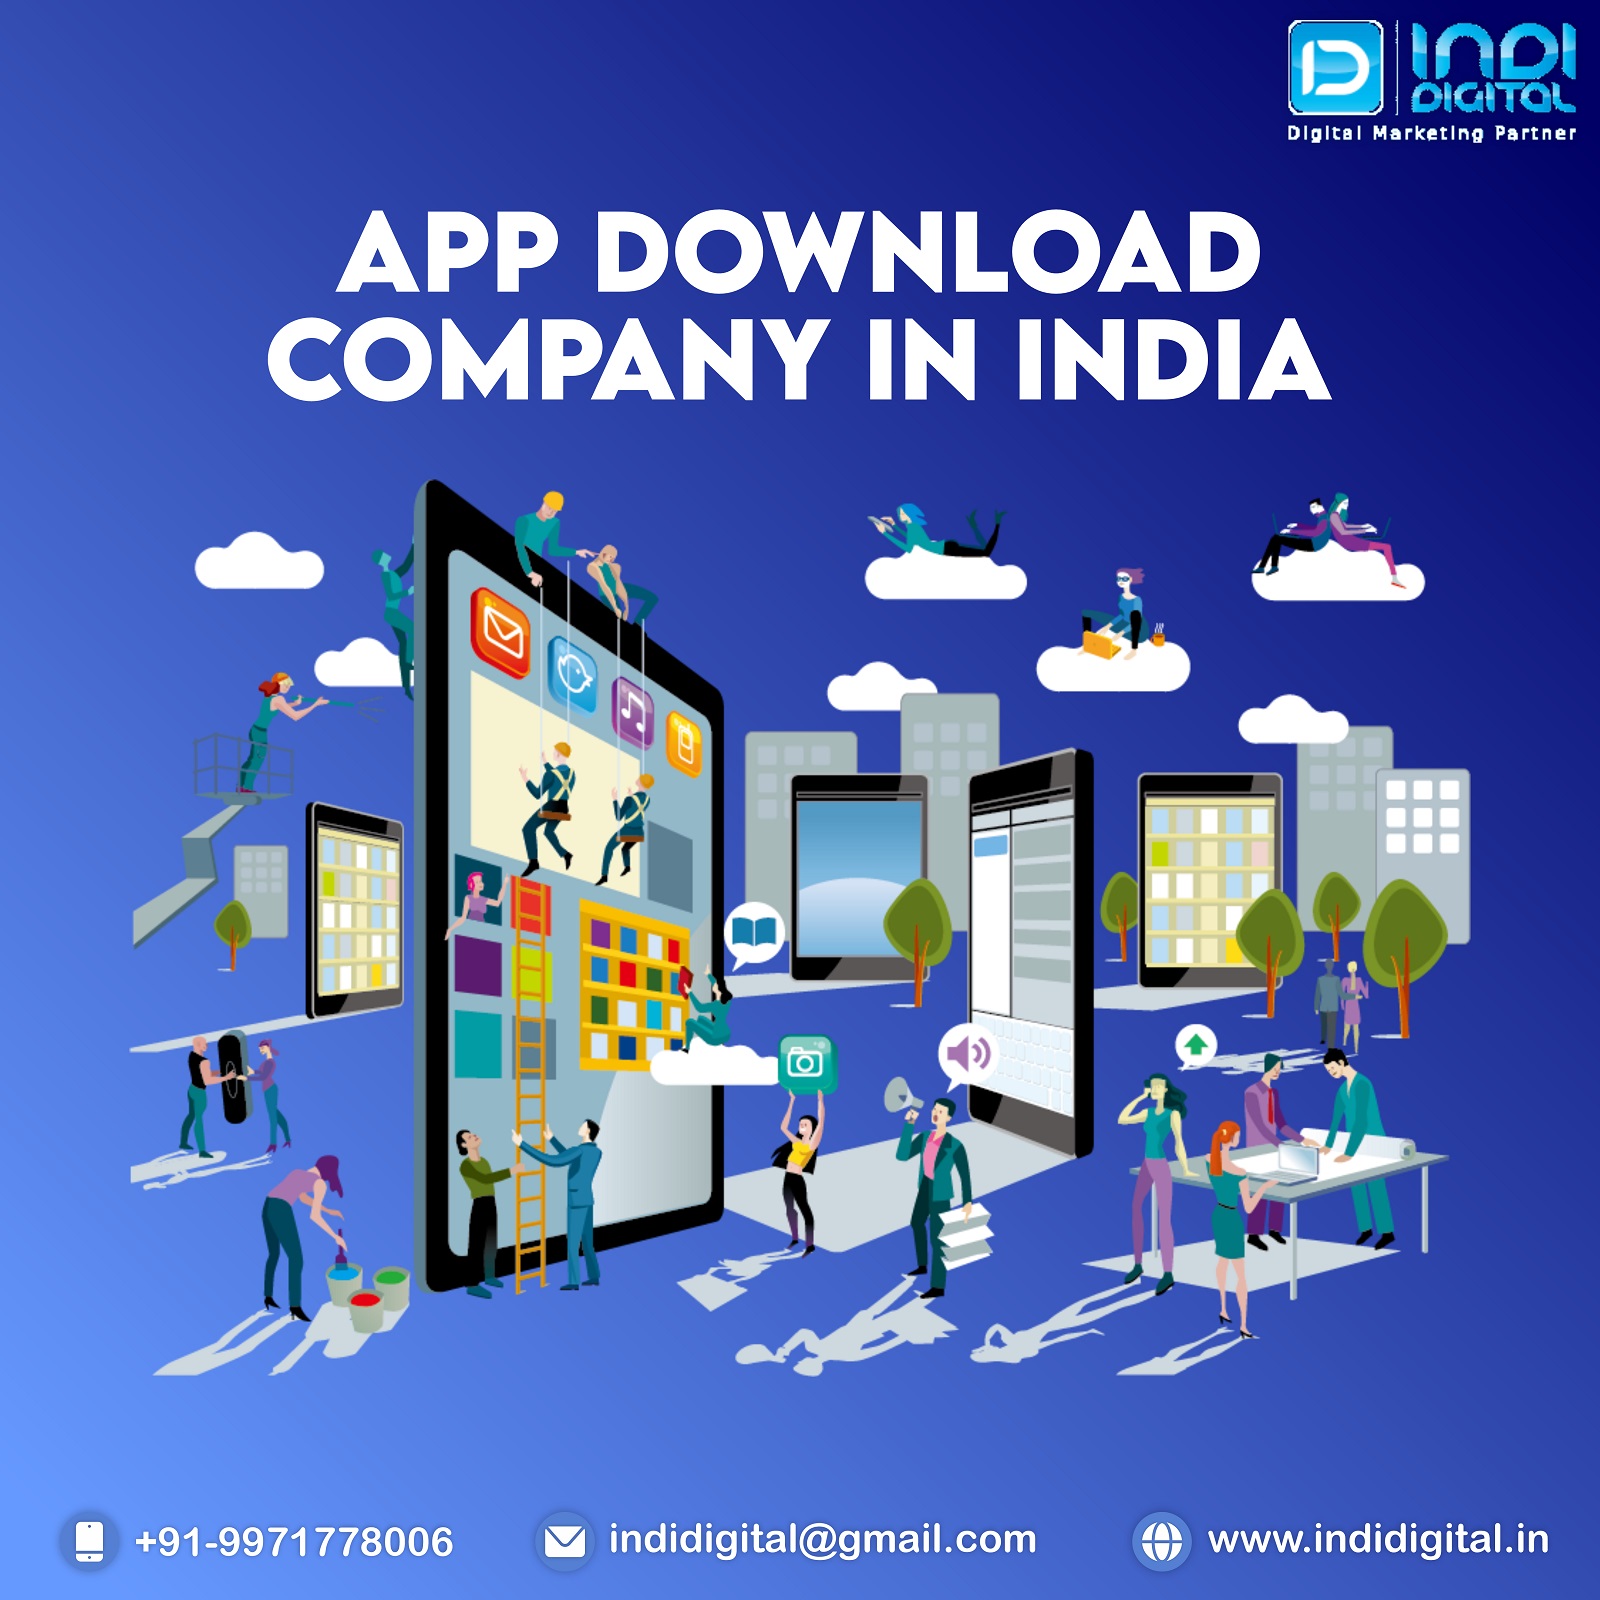 Avatar: App Download Company in India